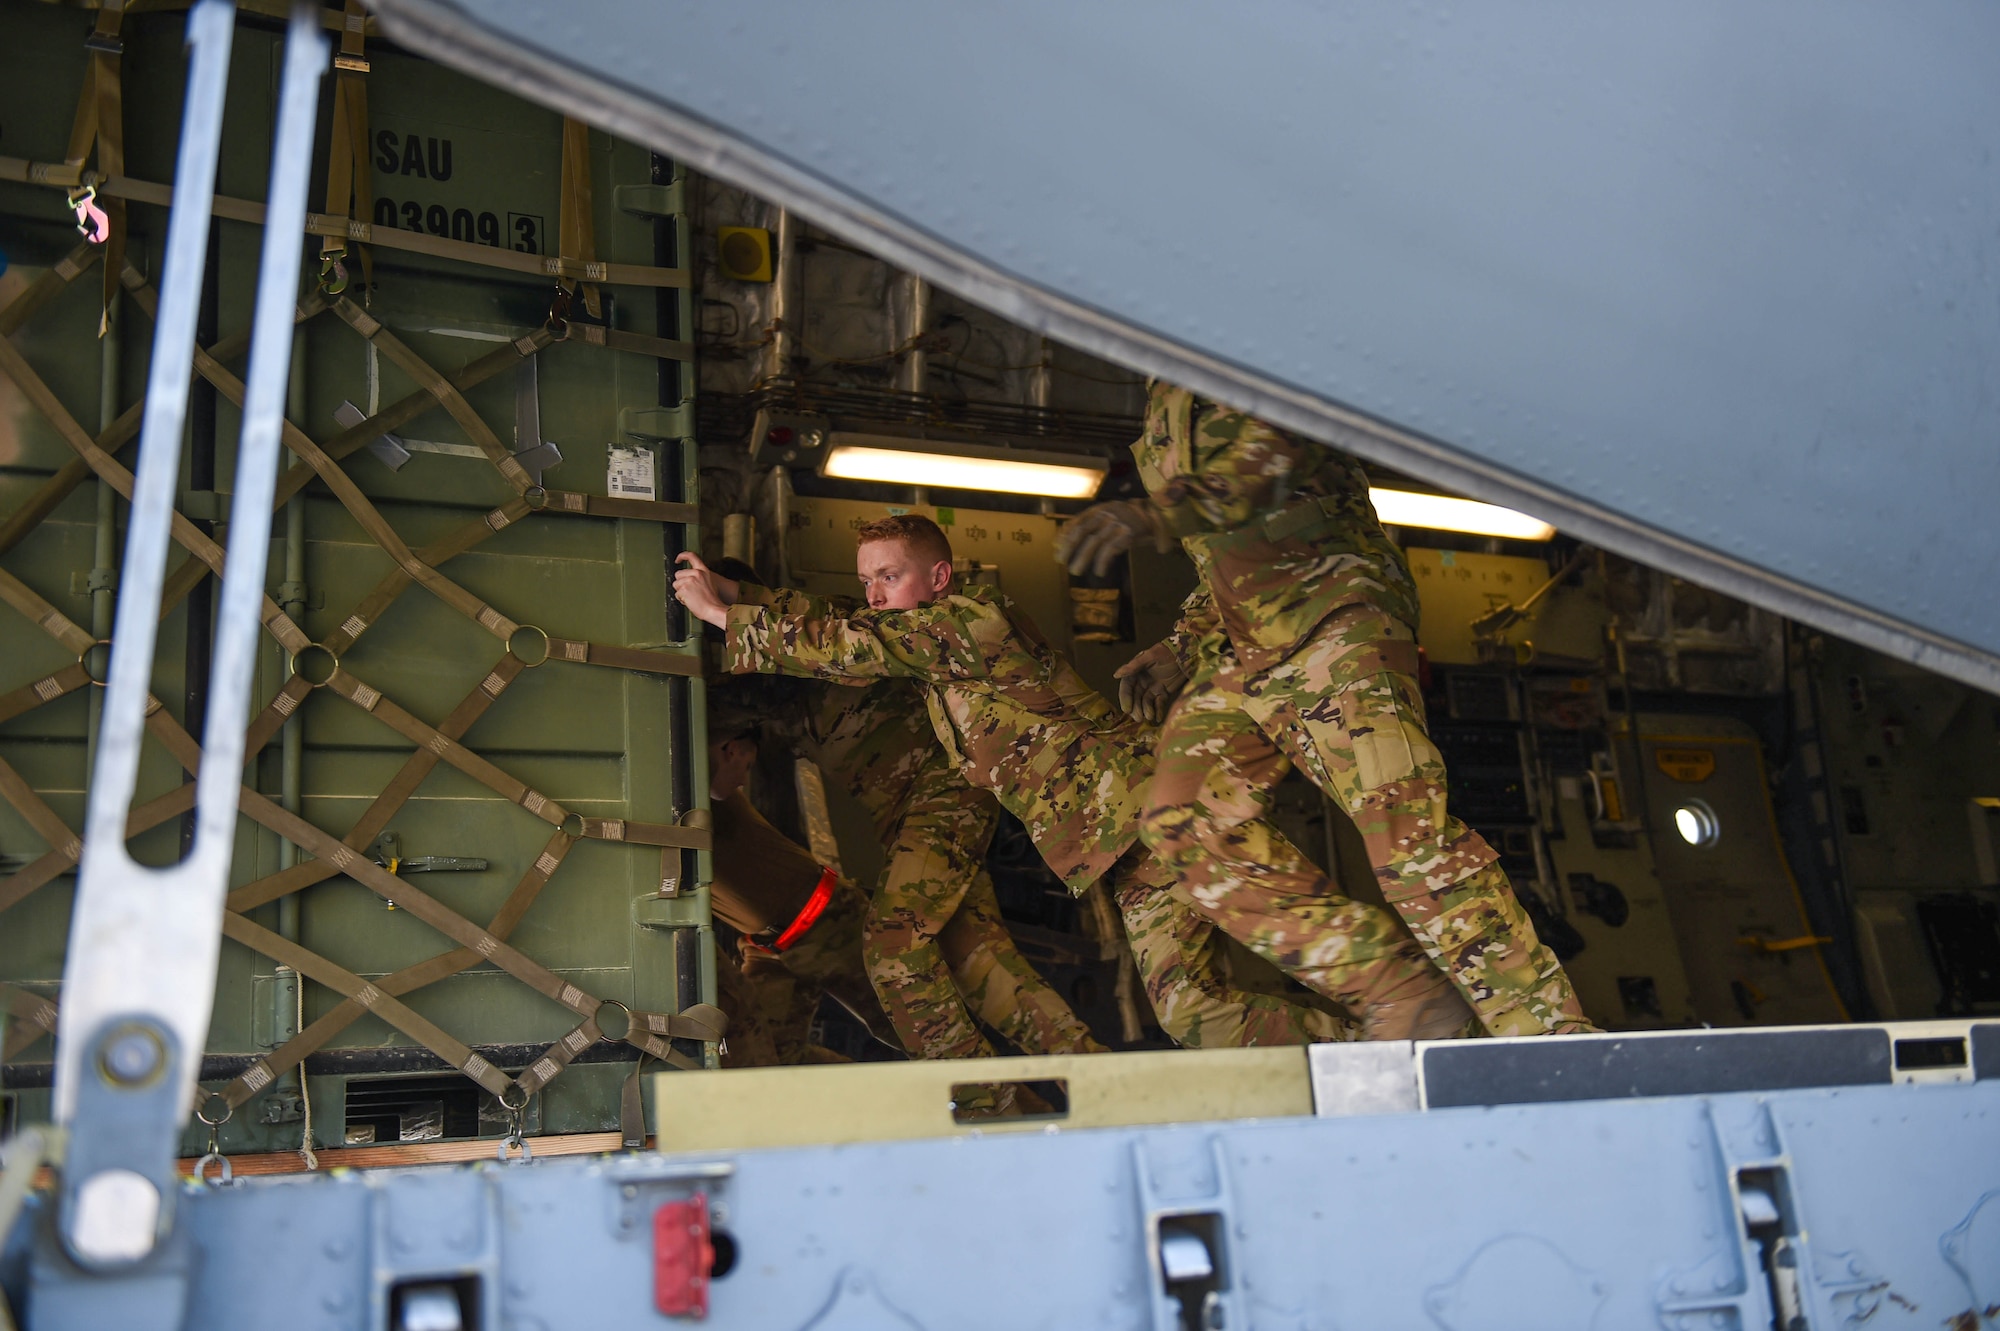 Airman 1st Class Kam Watt, 4th Airlift Squadron loadmaster, off-loads a piece of cargo off of a C-17 Globemaster III onto a K-loader in Kuwait, Dec. 18, 2019. The aircraft has multi-directional rollers towards the back of the cargo bay that make it easier to push and maneuver cargo. (U.S. Air Force photo by Airman 1st Class Mikayla Heineck)